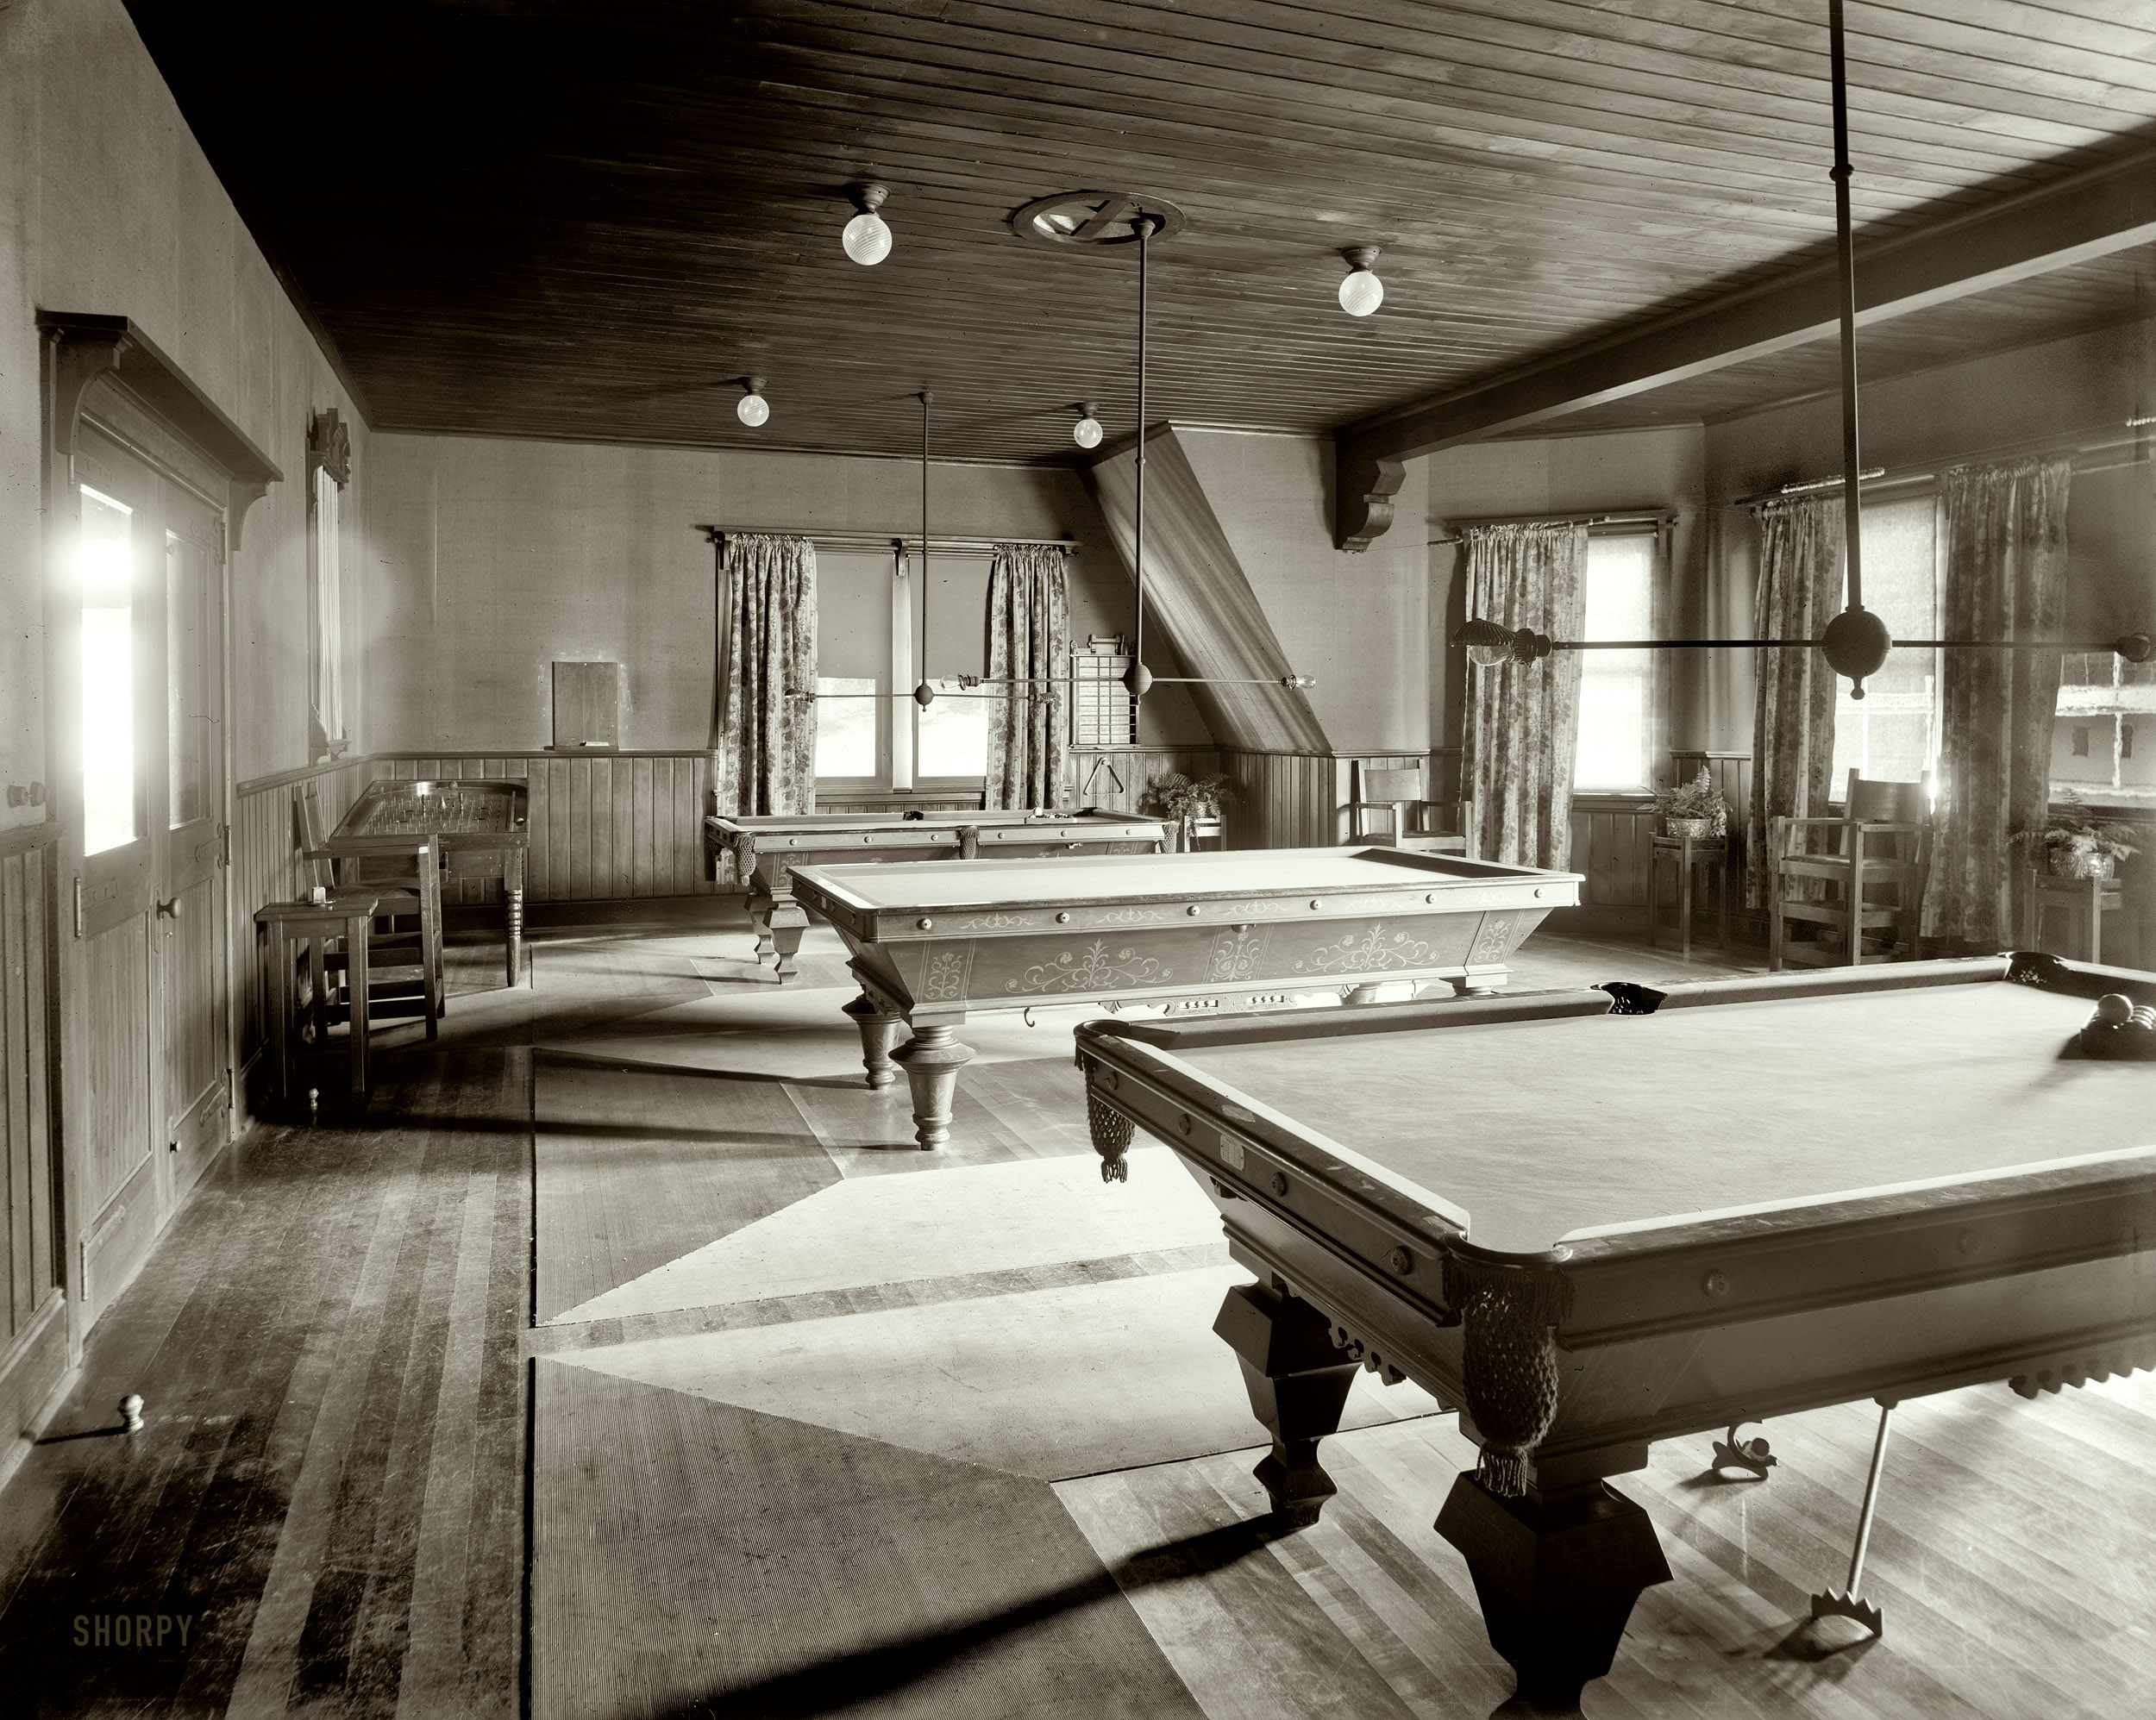 Upstate New York circa 1905. "Billiard hall at Paul Smith's casino, Adirondack Mountains." Note the pinball table in the corner. 8x10 glass plate. View full size.